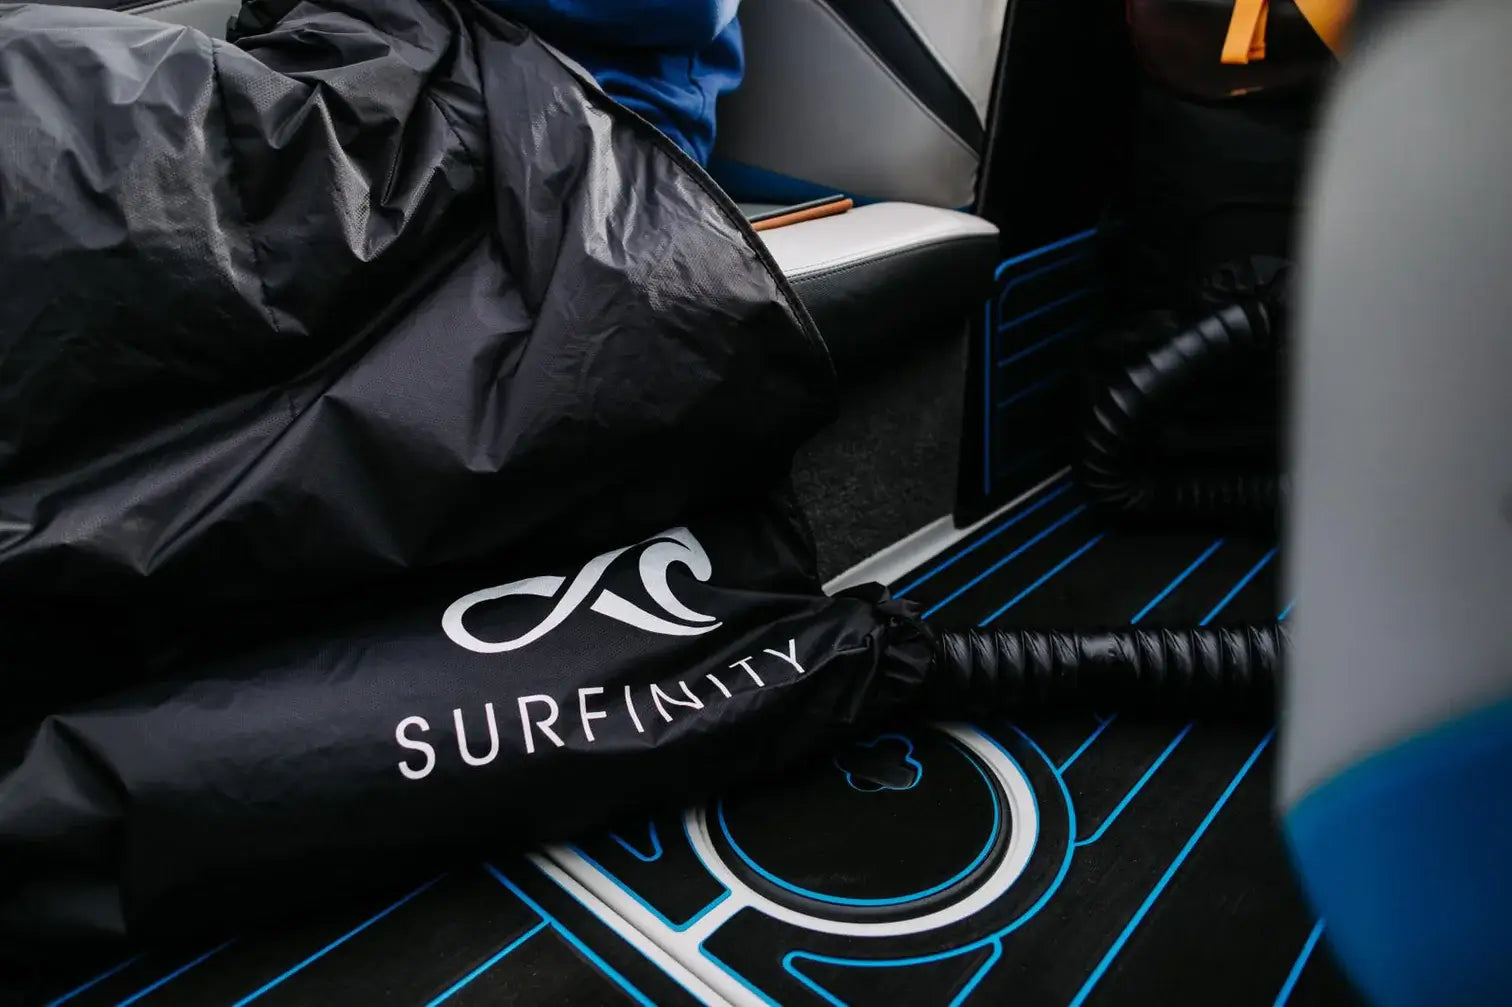 A wind-proof Malibu bag with the word Surfinity on it.